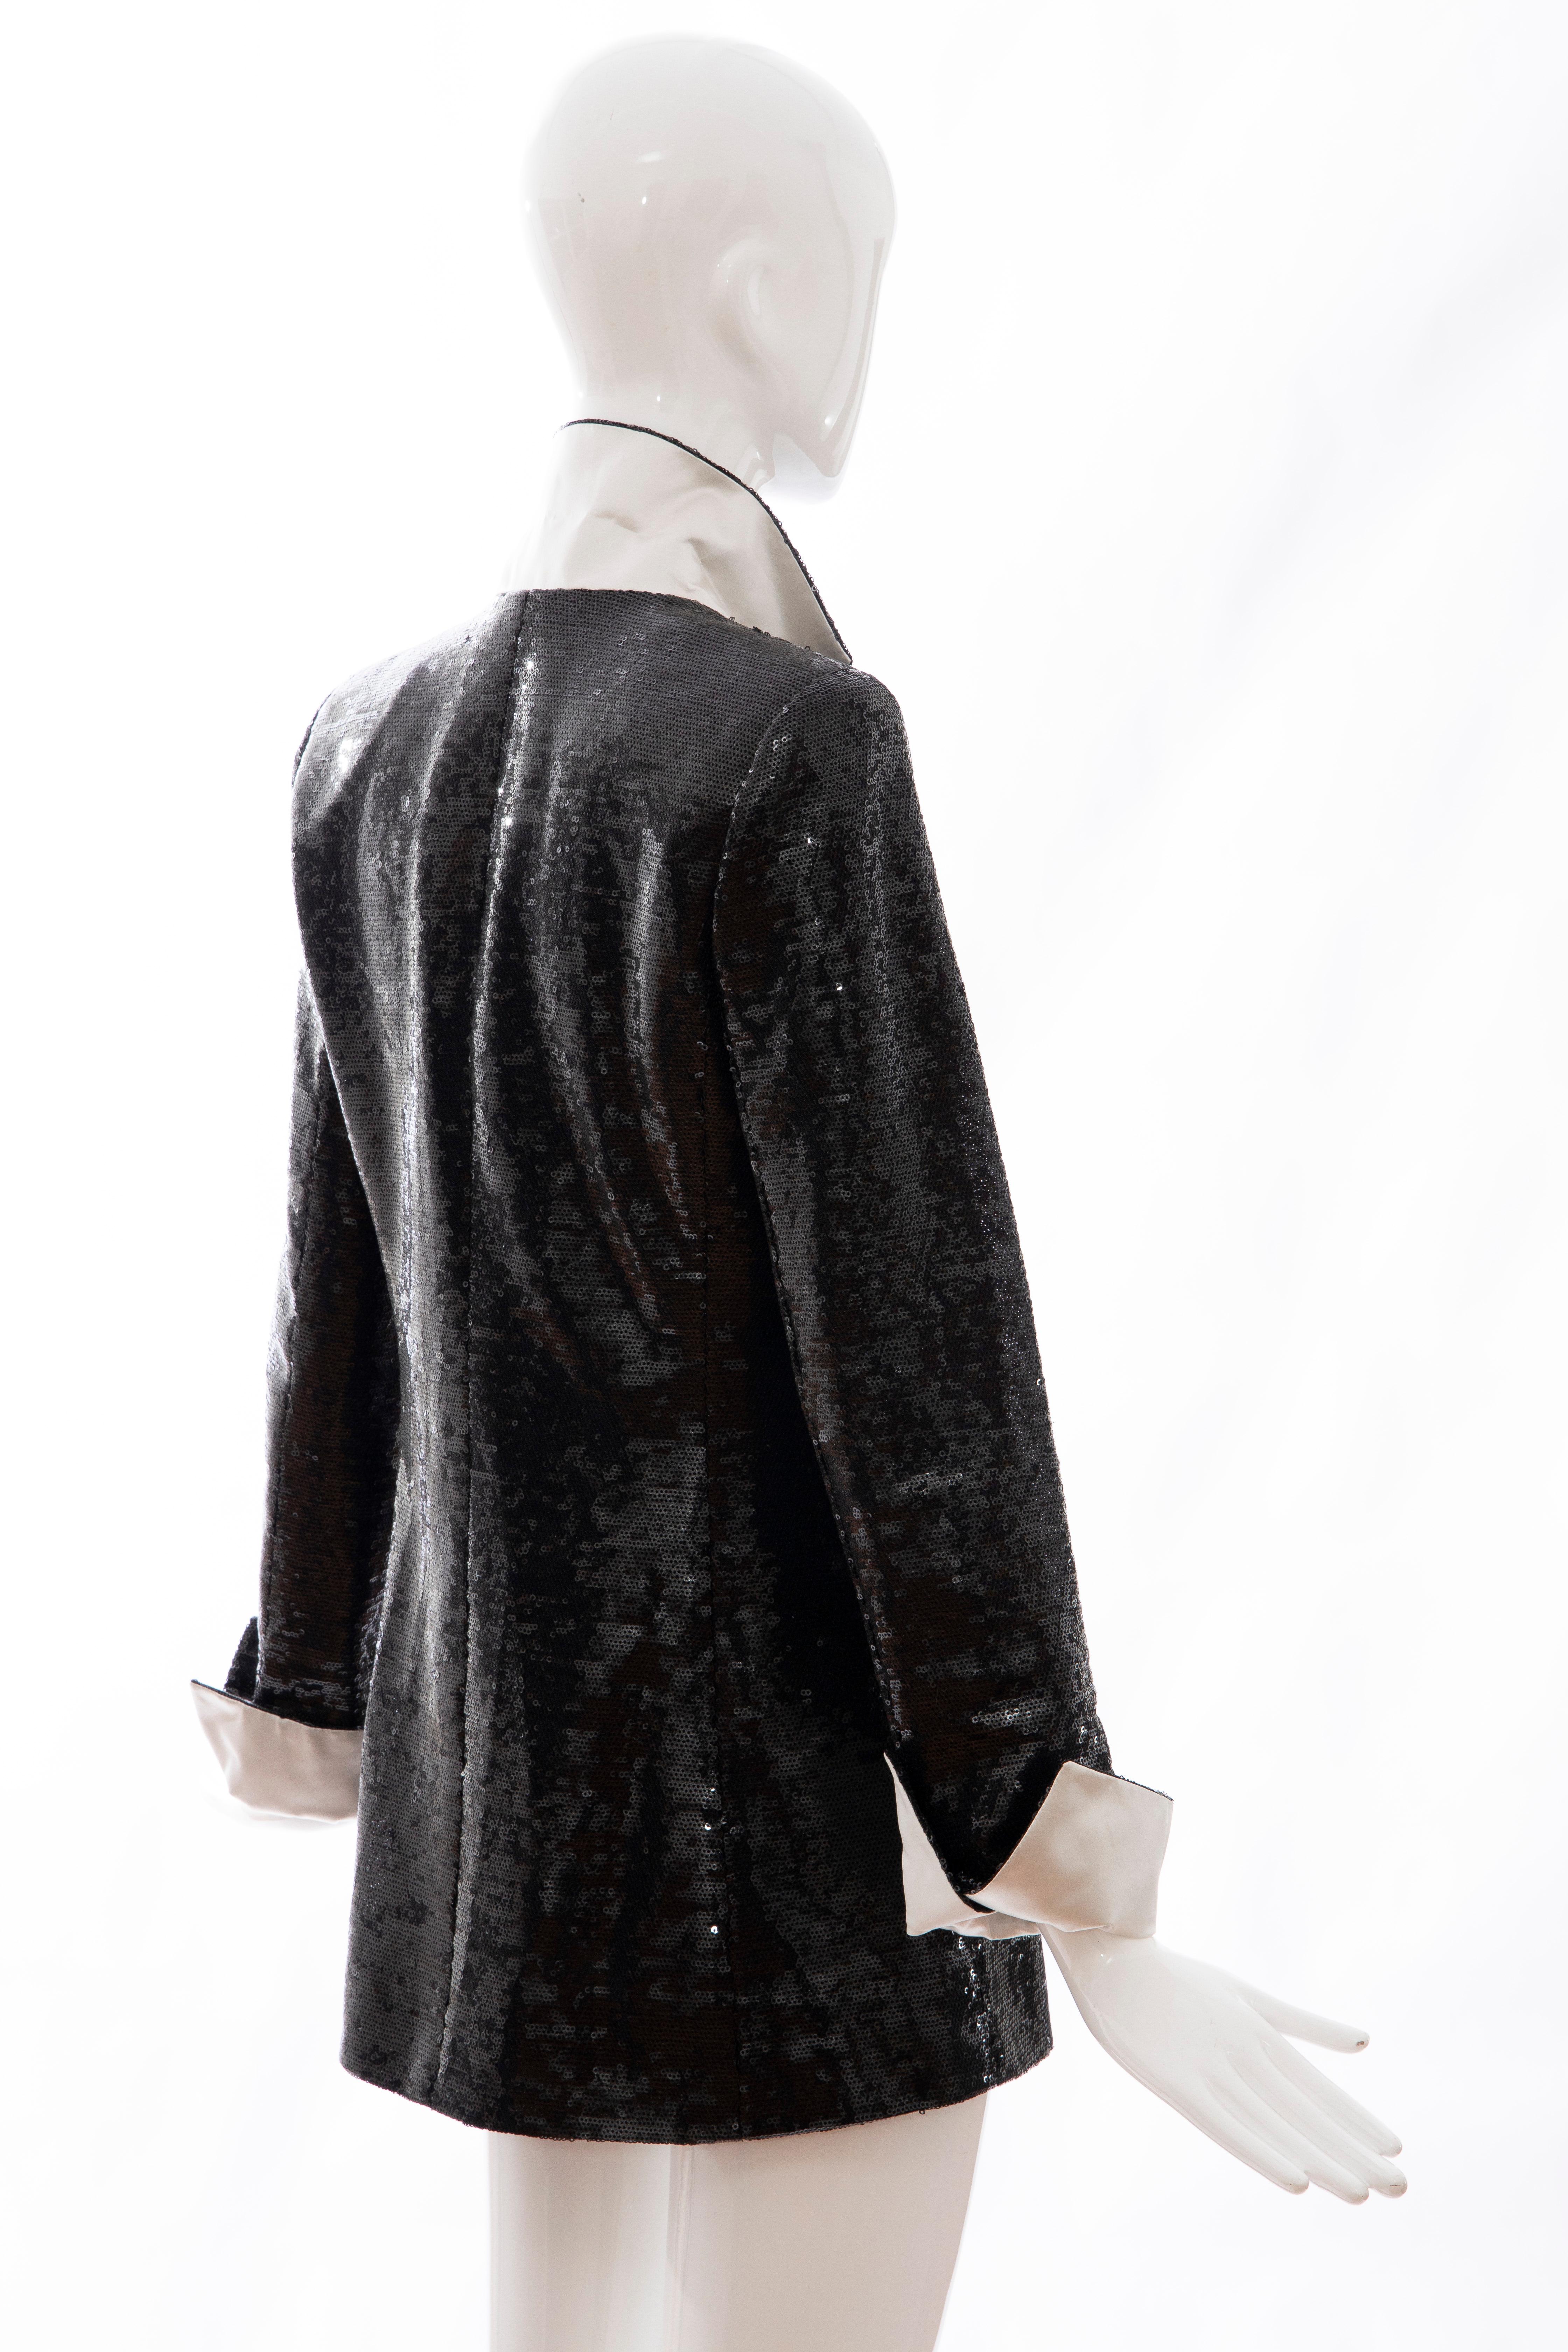 Chanel Black Embroidered Sequin Evening Jacket Ivory Silk Cuffs, Cruise 2009 In Excellent Condition For Sale In Cincinnati, OH